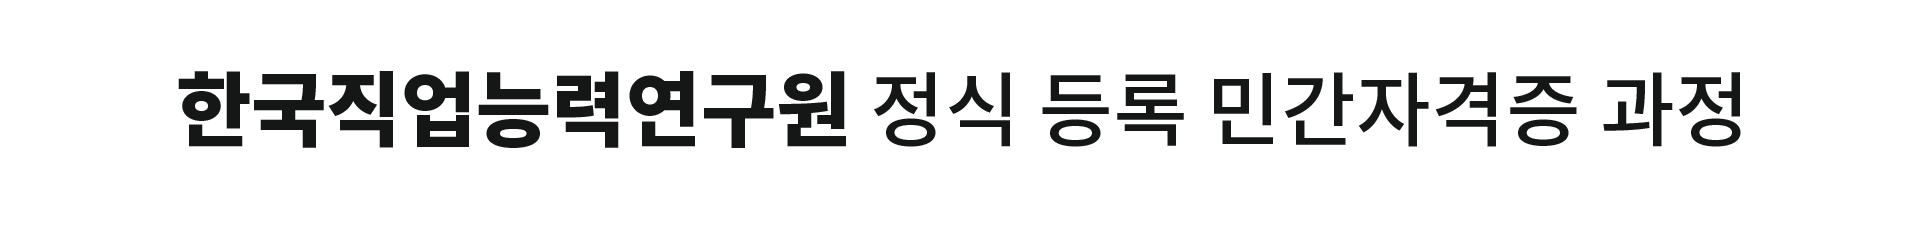 https://www.chimae.or.kr/wp-content/uploads/2022/11/silve04_01.png